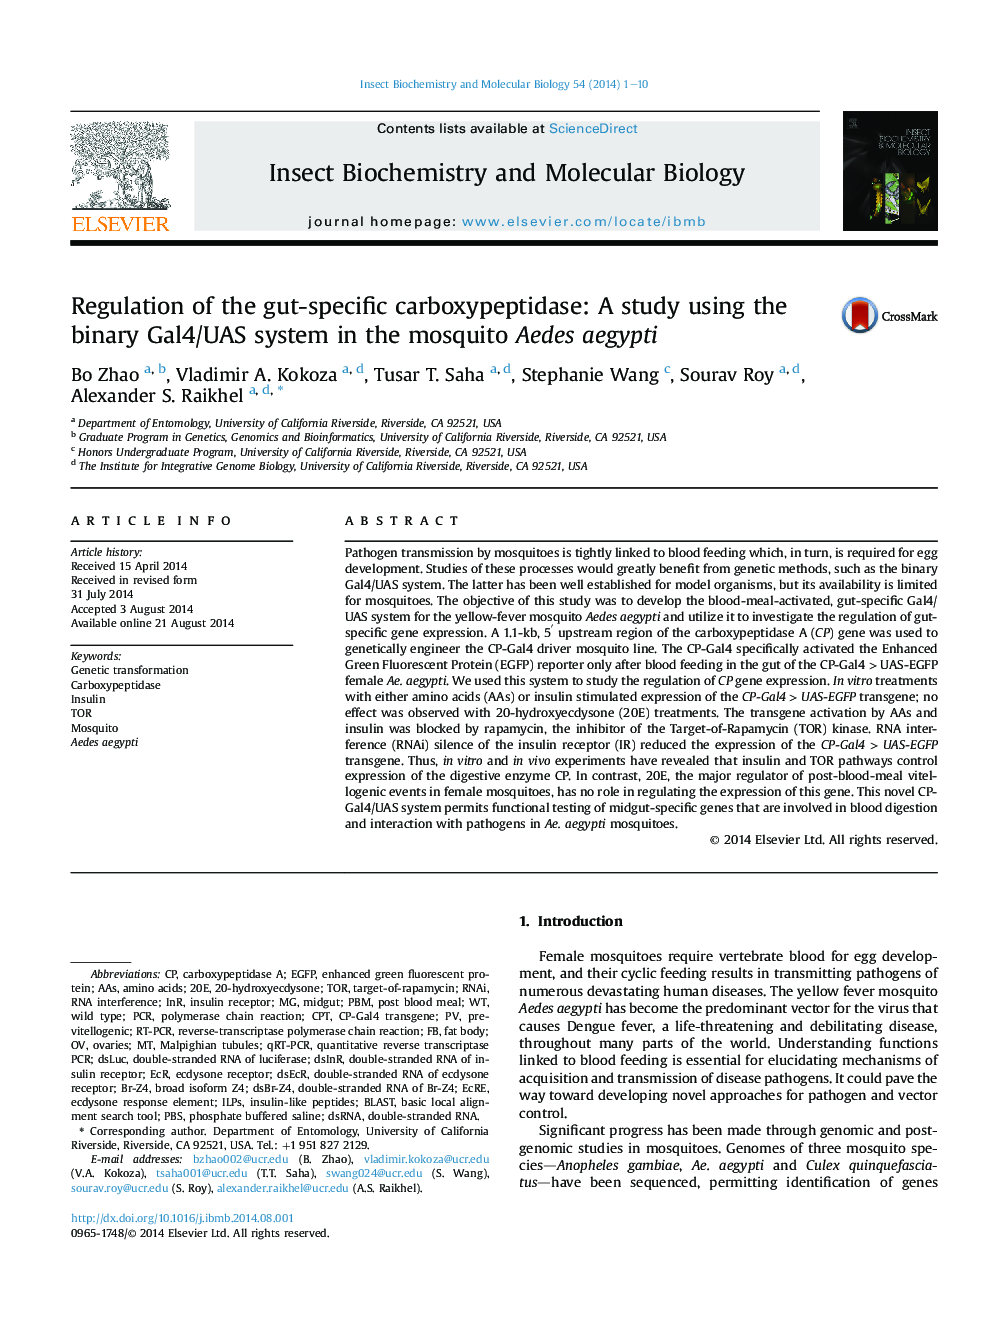 Regulation of the gut-specific carboxypeptidase: A study using the binary Gal4/UAS system in the mosquito Aedes aegypti